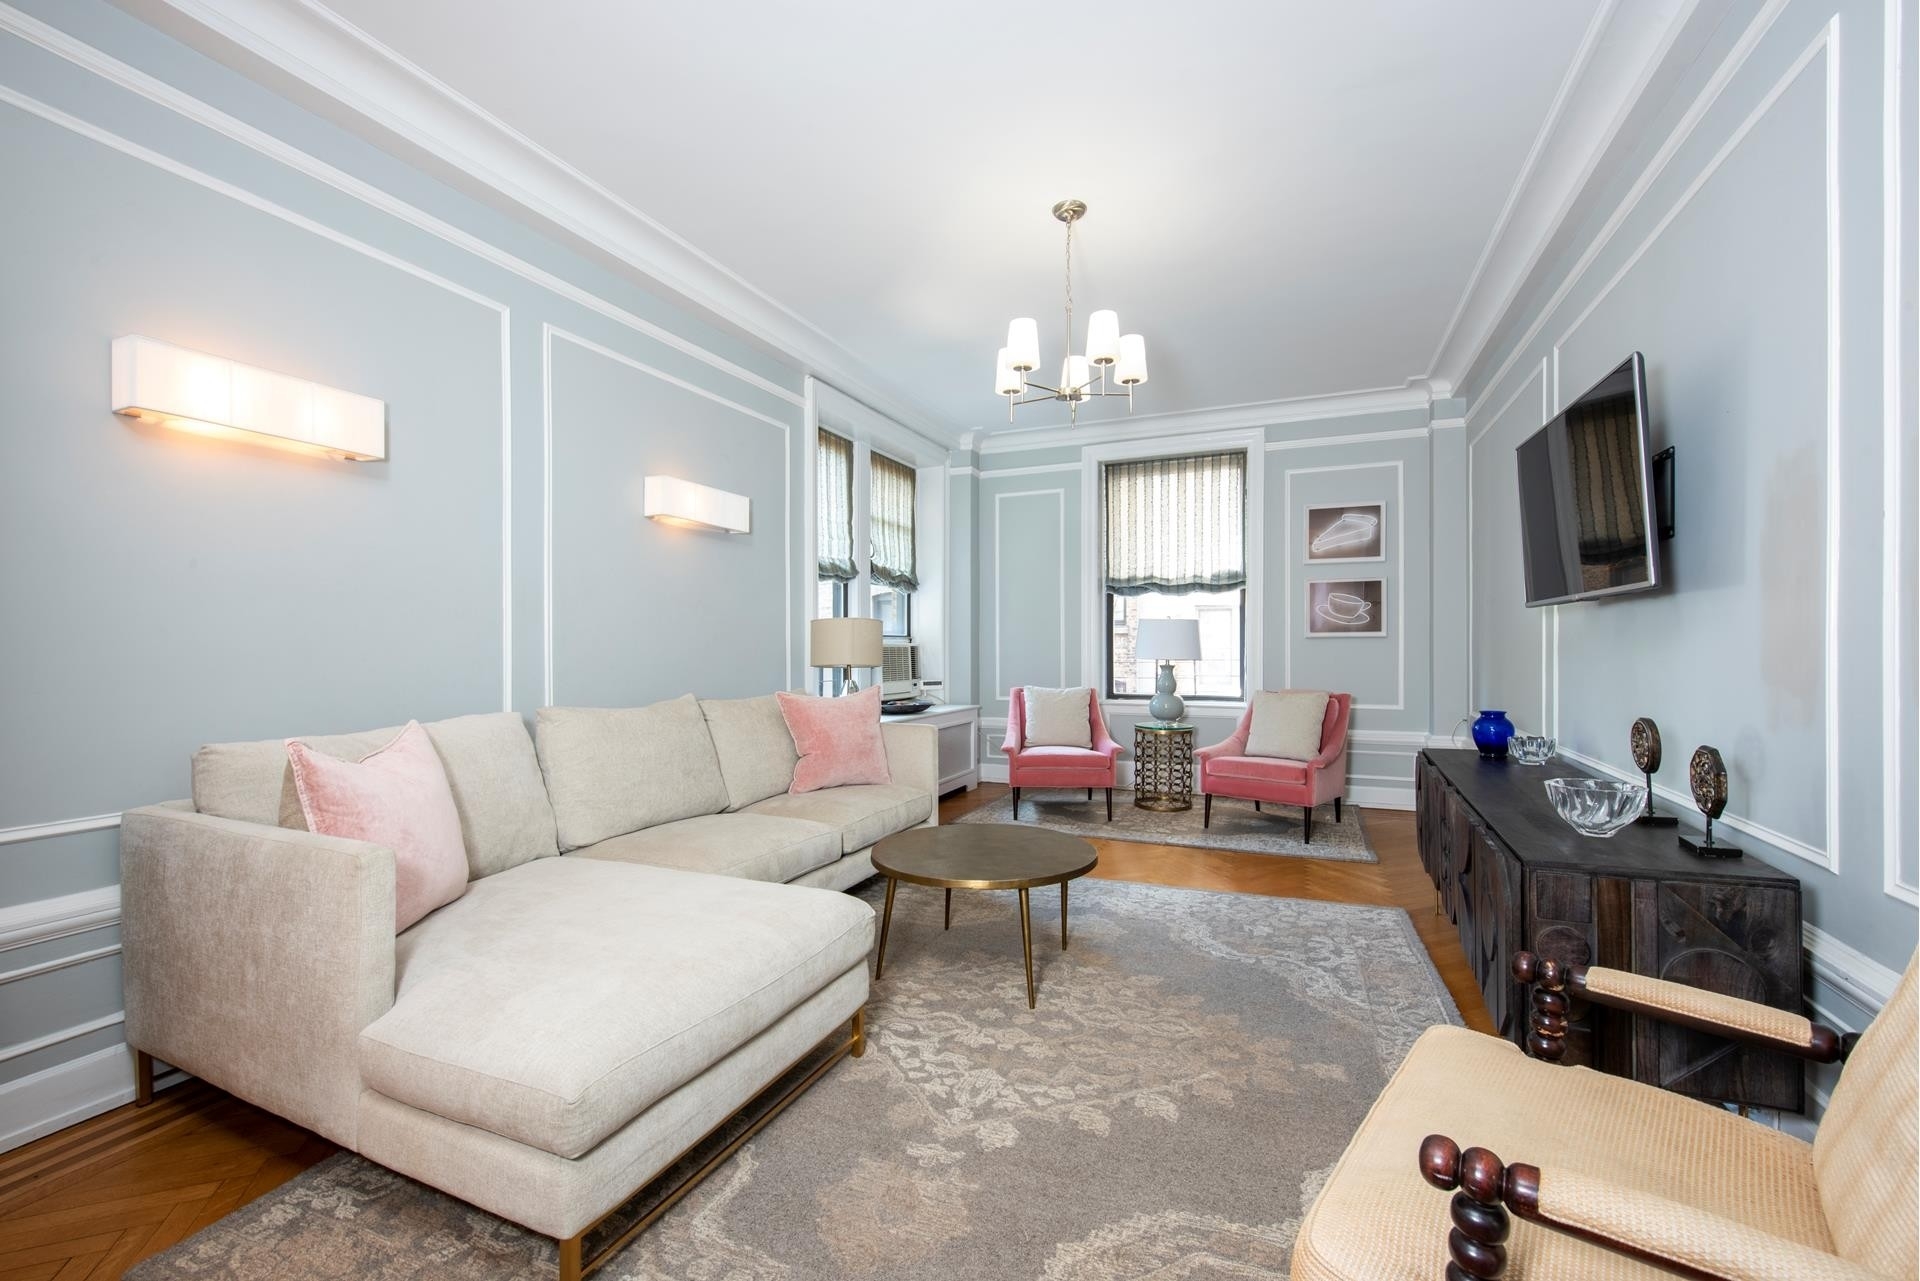 Co-op Properties for Sale at 771 W END AVE , 5D Upper West Side, New York, New York 10025